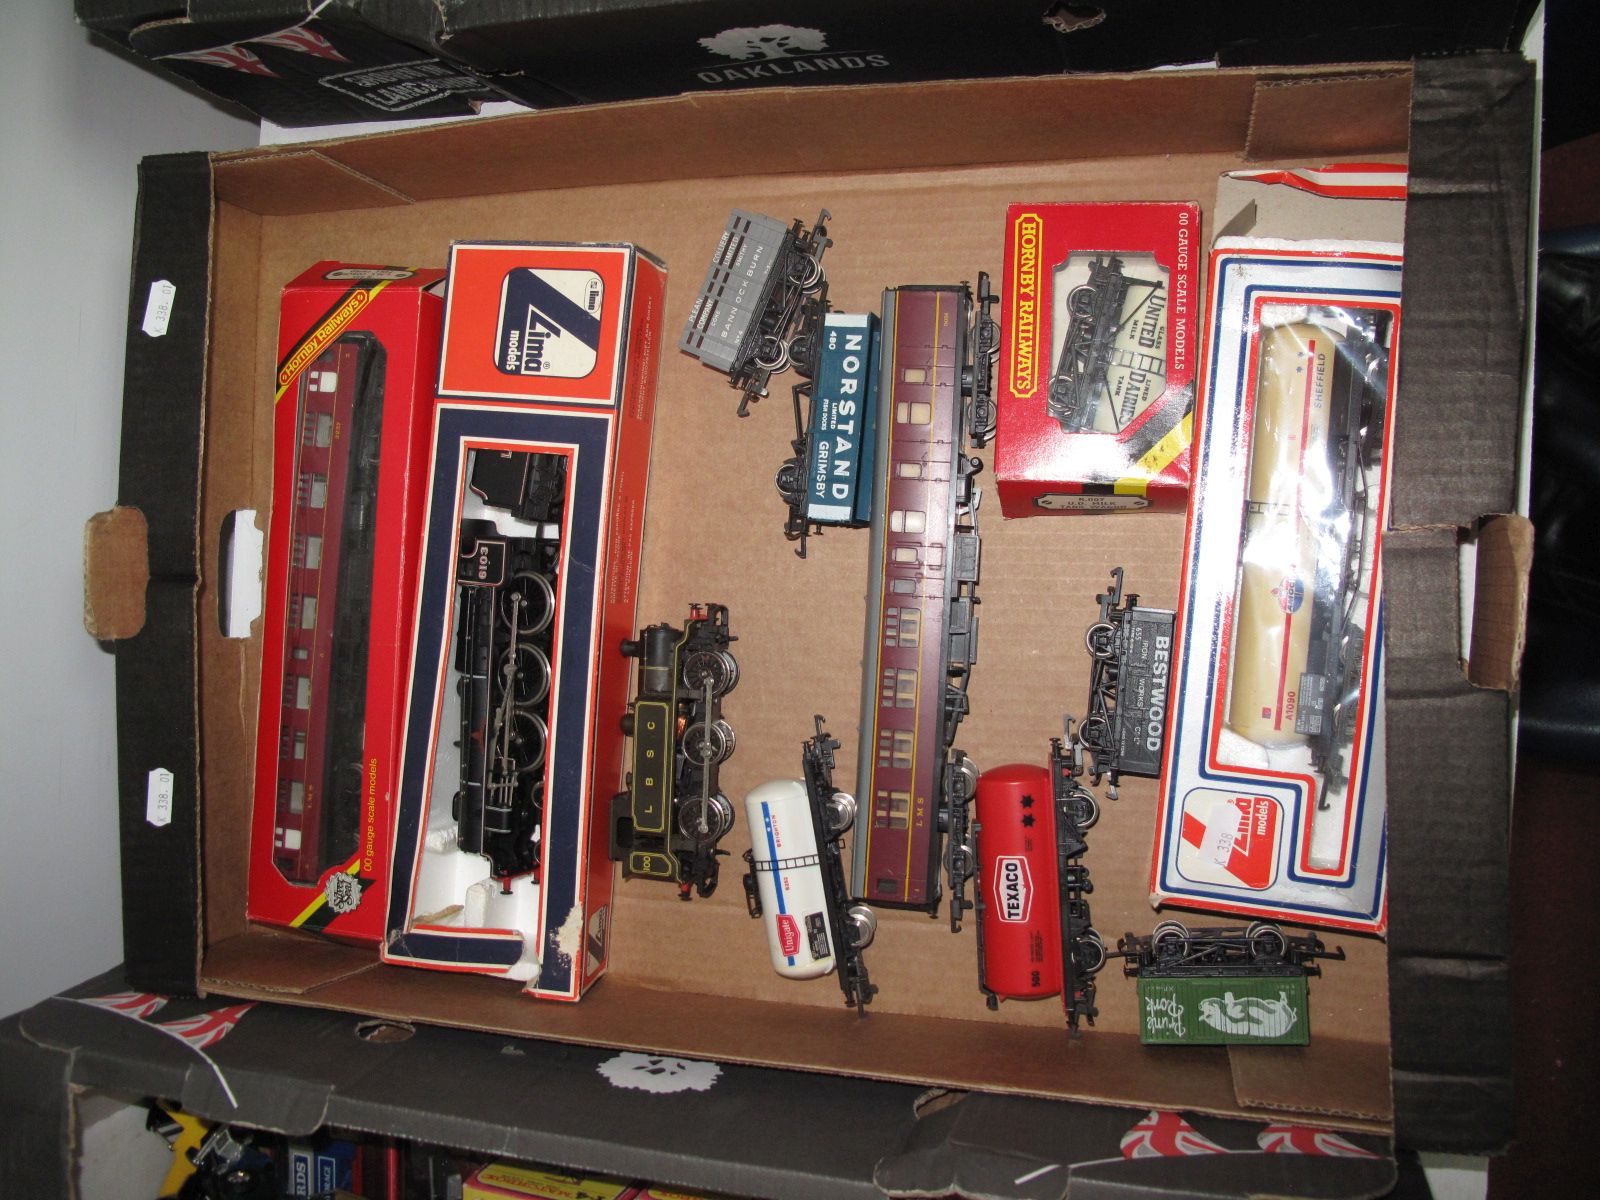 A Quantity of 'OO' Model Railway Items by Hornby and Lima, including a 4-6-0 'Royal Scots